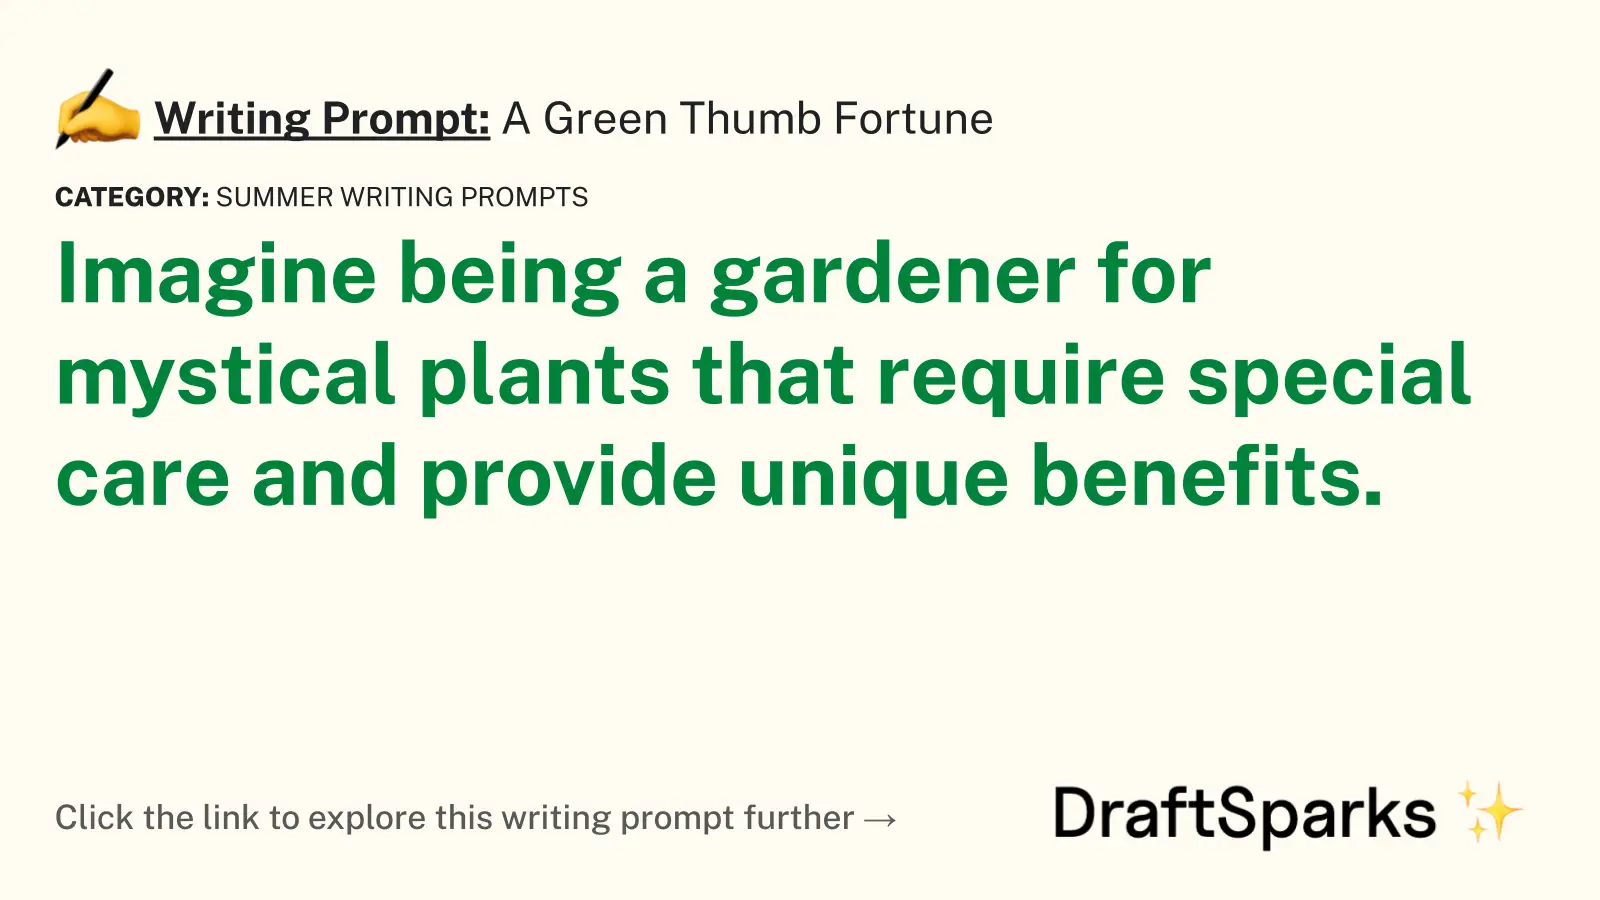 A Green Thumb Fortune